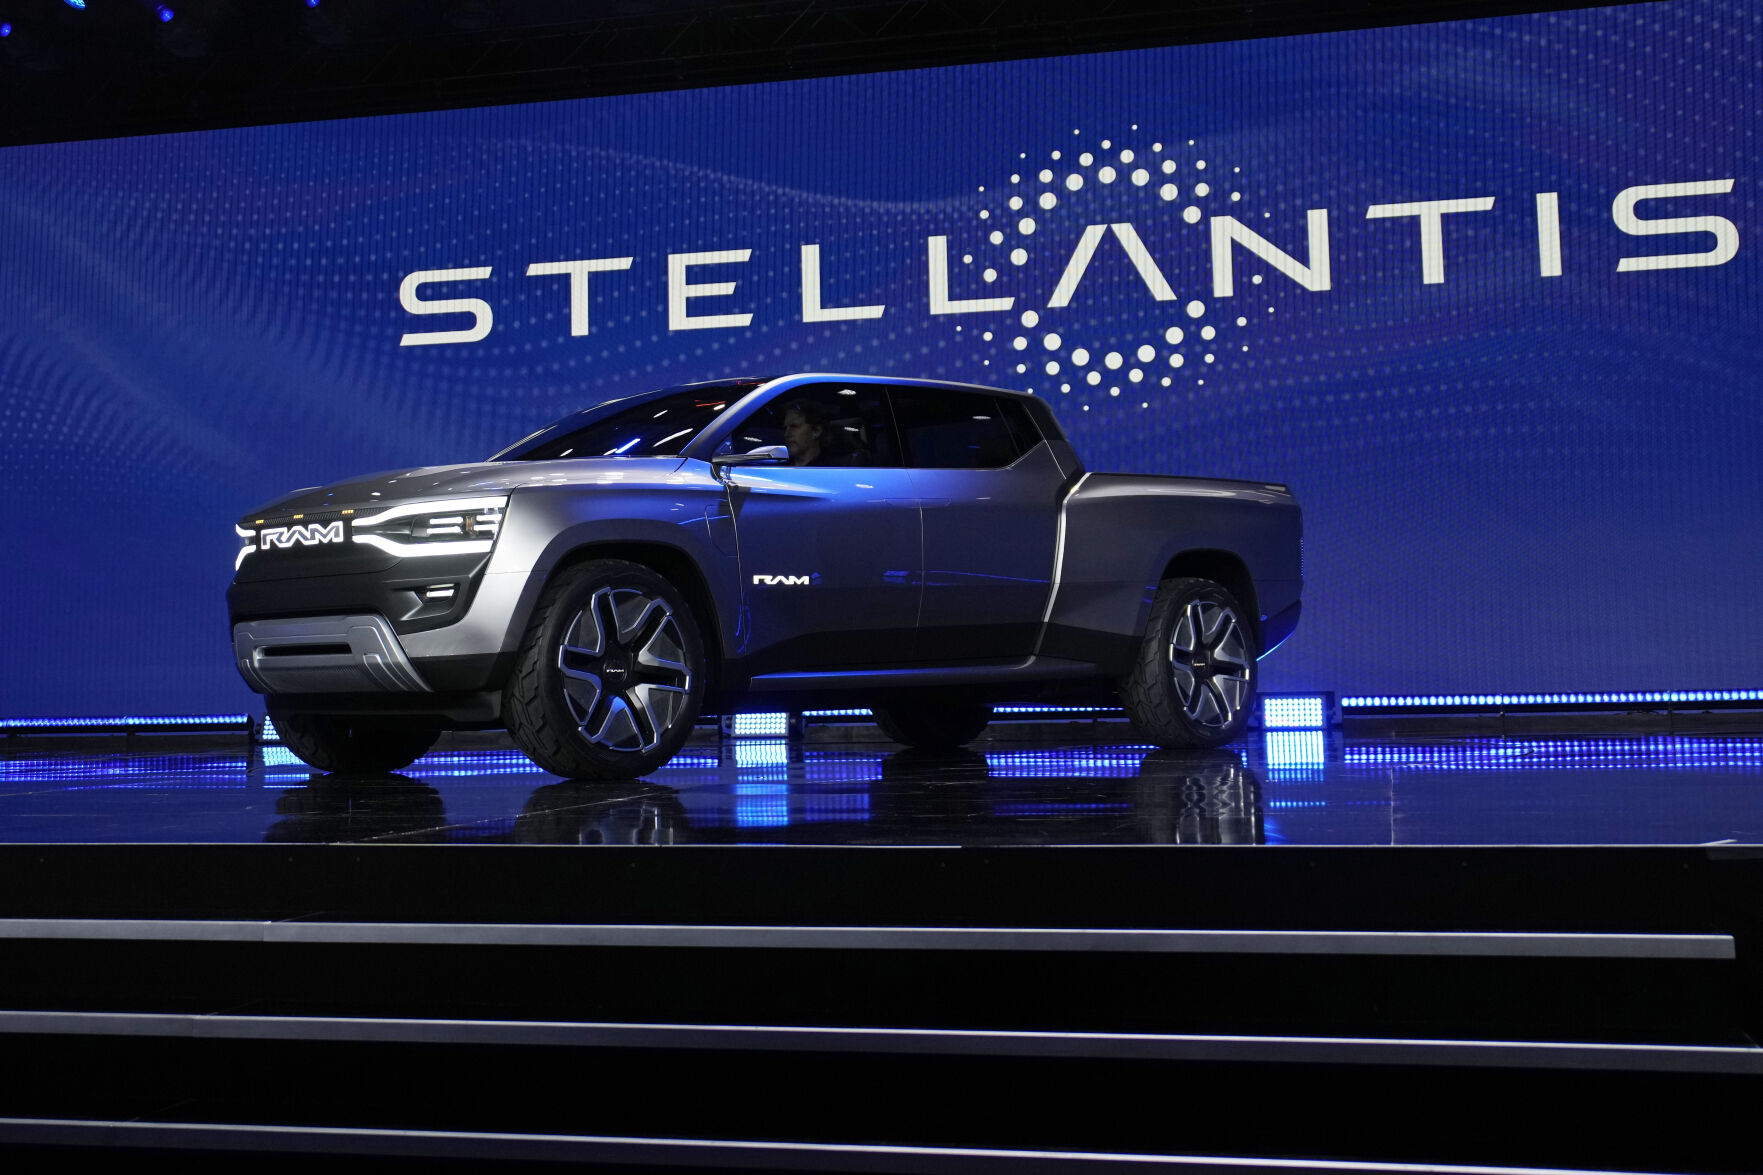 <p>FILE - The Ram 1500 Revolution electric battery powered pickup truck is displayed on stage during the Stellantis keynote at the CES tech show on Jan. 5, 2023, in Las Vegas. Automaker Stellantis has reported its earnings grew in 2022 from a year earlier as it pressed an industrywide strategy to shift into electric vehicles, leading to a jump in sales. The company said Wednesday, Feb. 22, 2023, that net revenue of 179.6 billion euros was up 18% from 2021. It reported net profit of 16.8 billion, up 26% from 2021. (AP Photo/John Locher)</p>   PHOTO CREDIT: John Locher 